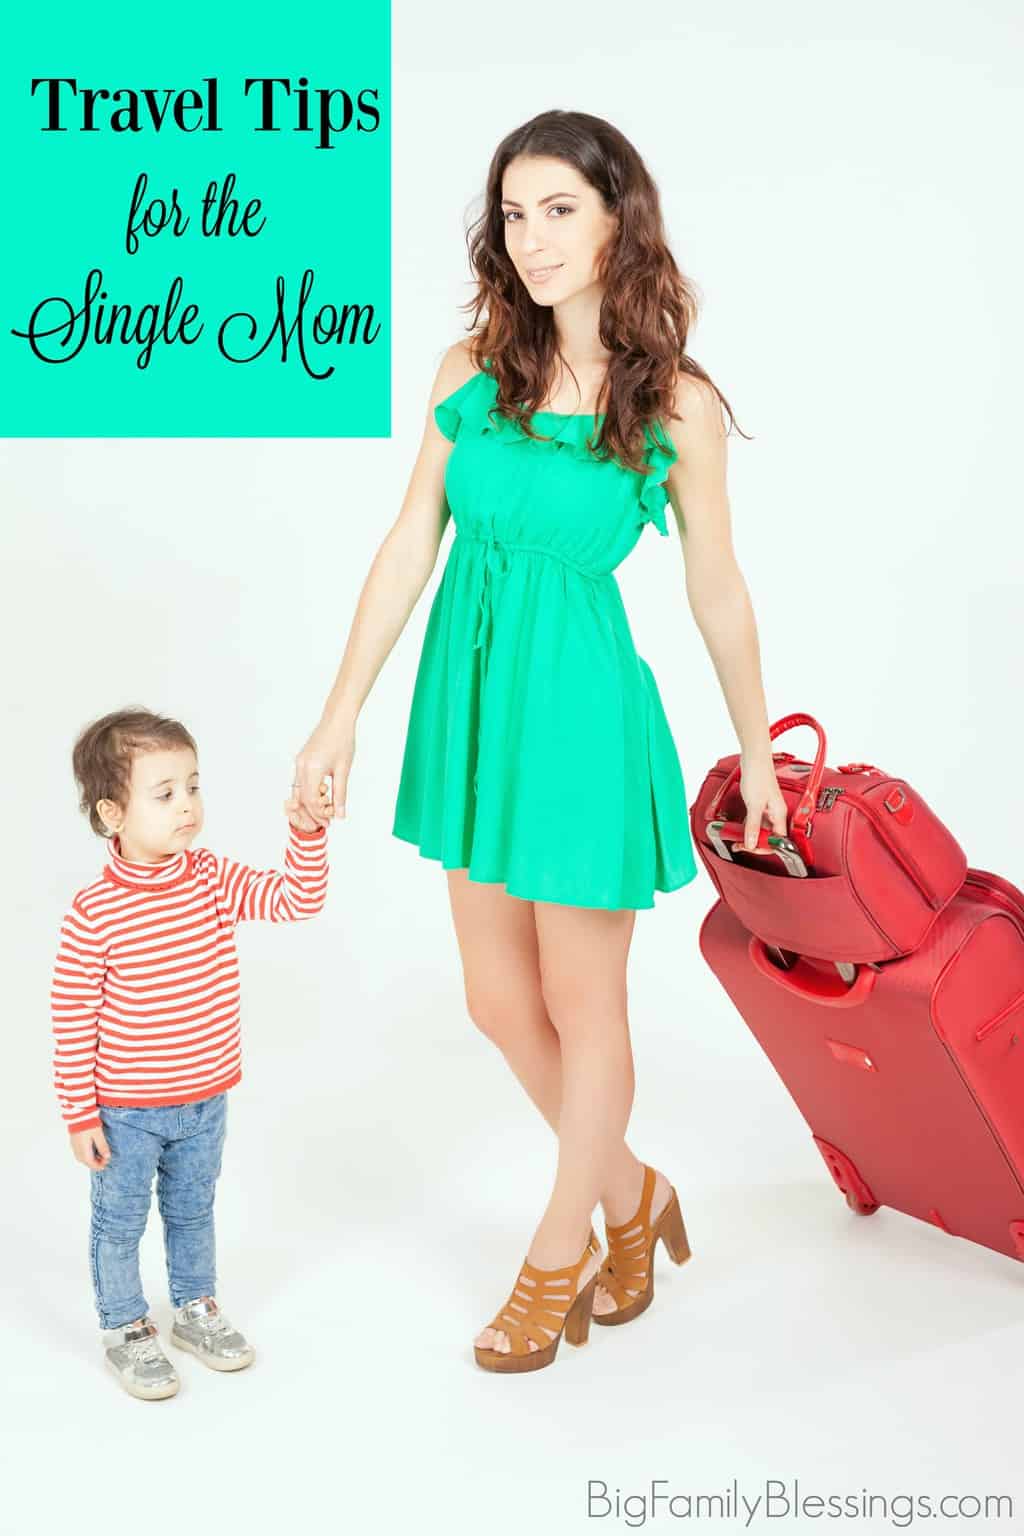 If traveling as a single mom has you worried, these single mom travel tips are sure to help ease your mind. Single moms juggle a lot on their own, but when it comes to vacationing as a single mom, many are nervous to adventure to a strange place with kids in tow. If you are nervous to brave vacation as a single mom, these tips are for you!